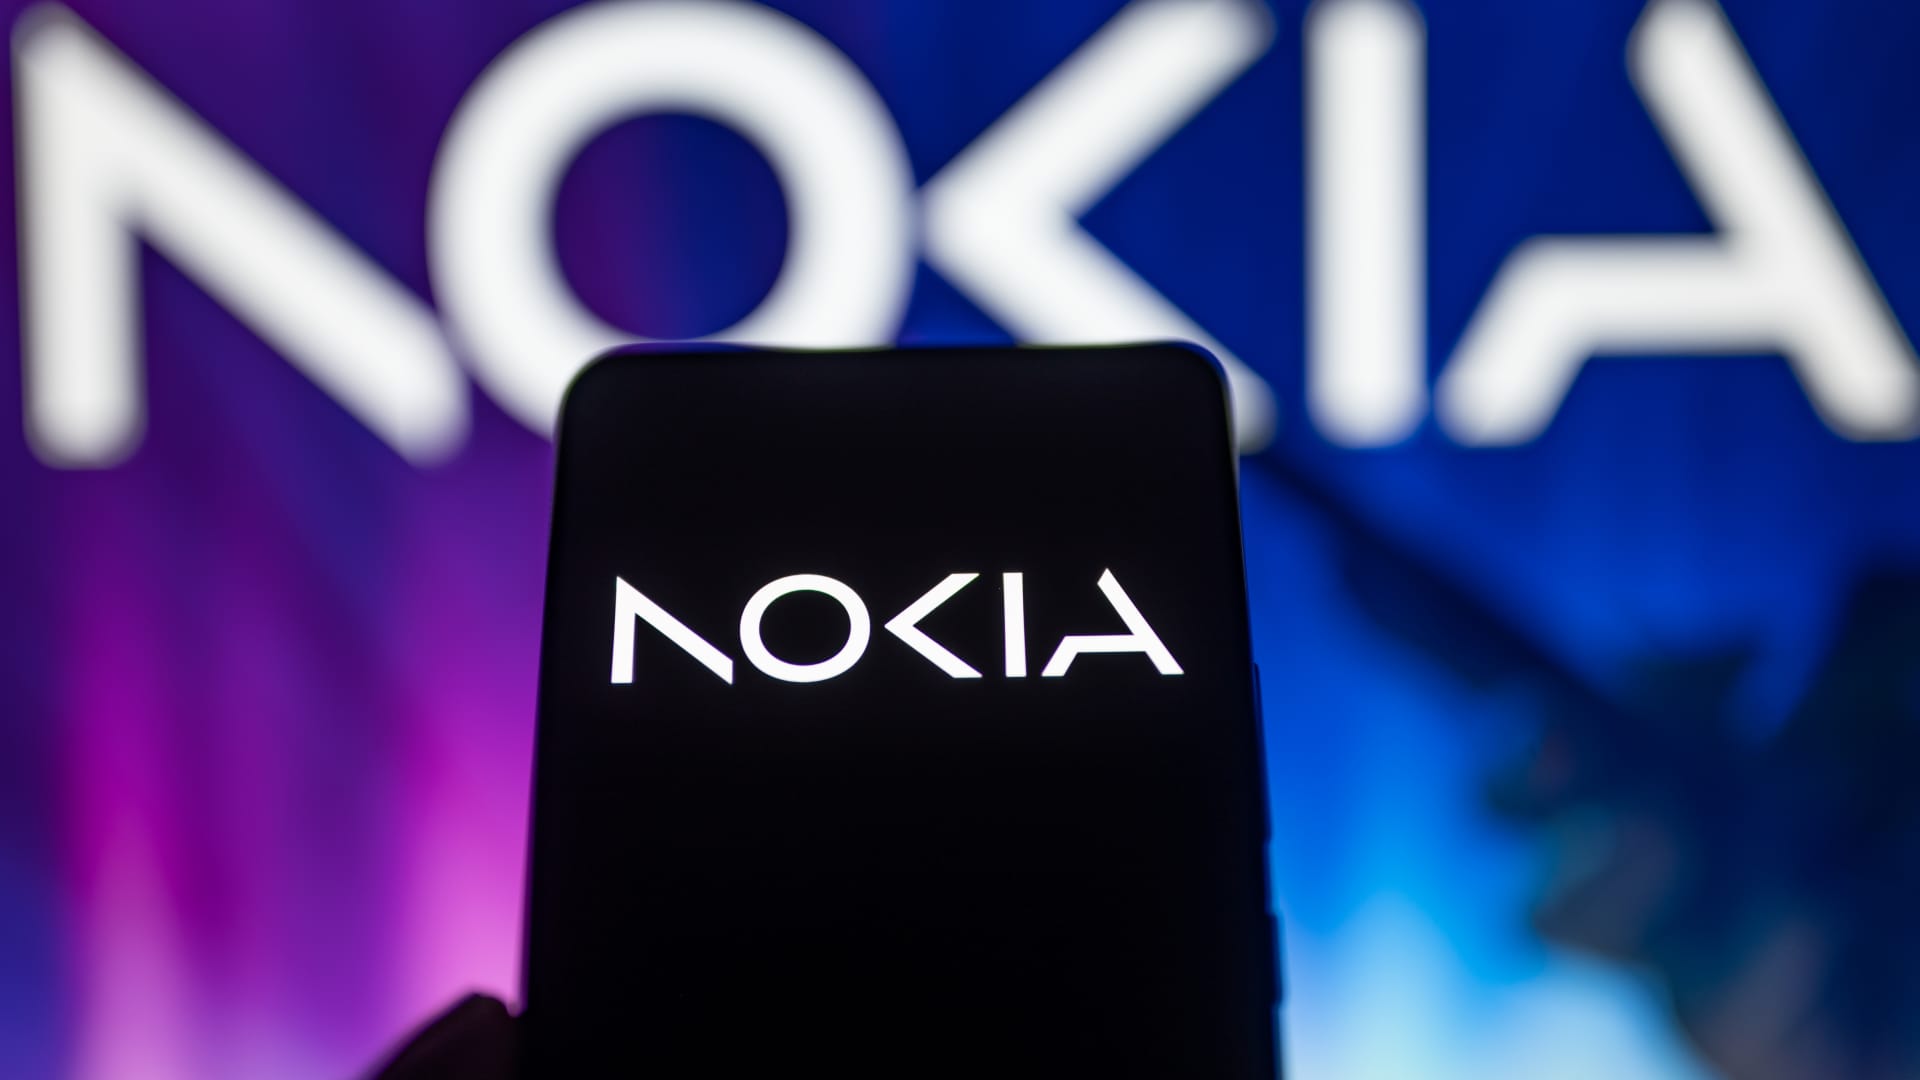 Nokia’s Stock Soars as 3 Million Share Repurchase Plan Unveiled